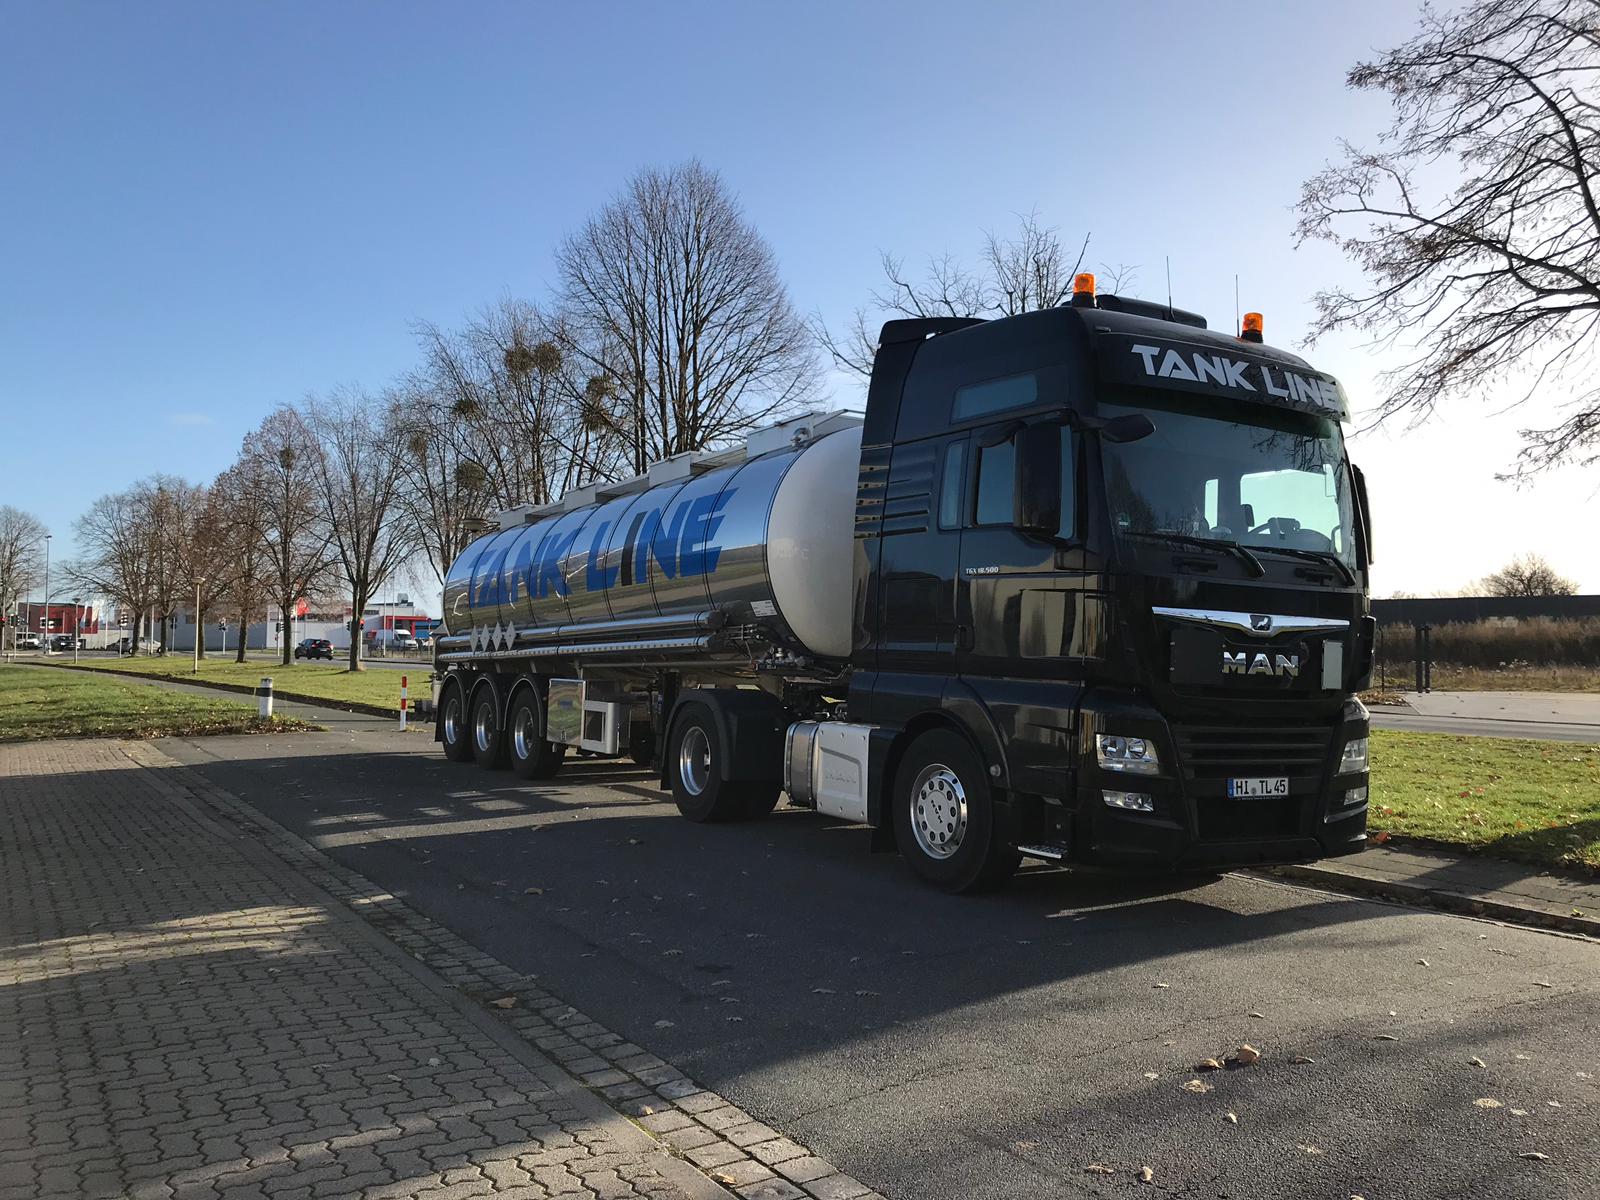 Tank Line GmbH Speditionsgesellschaft optimises their transport processes thanks to the logistics software CarLo